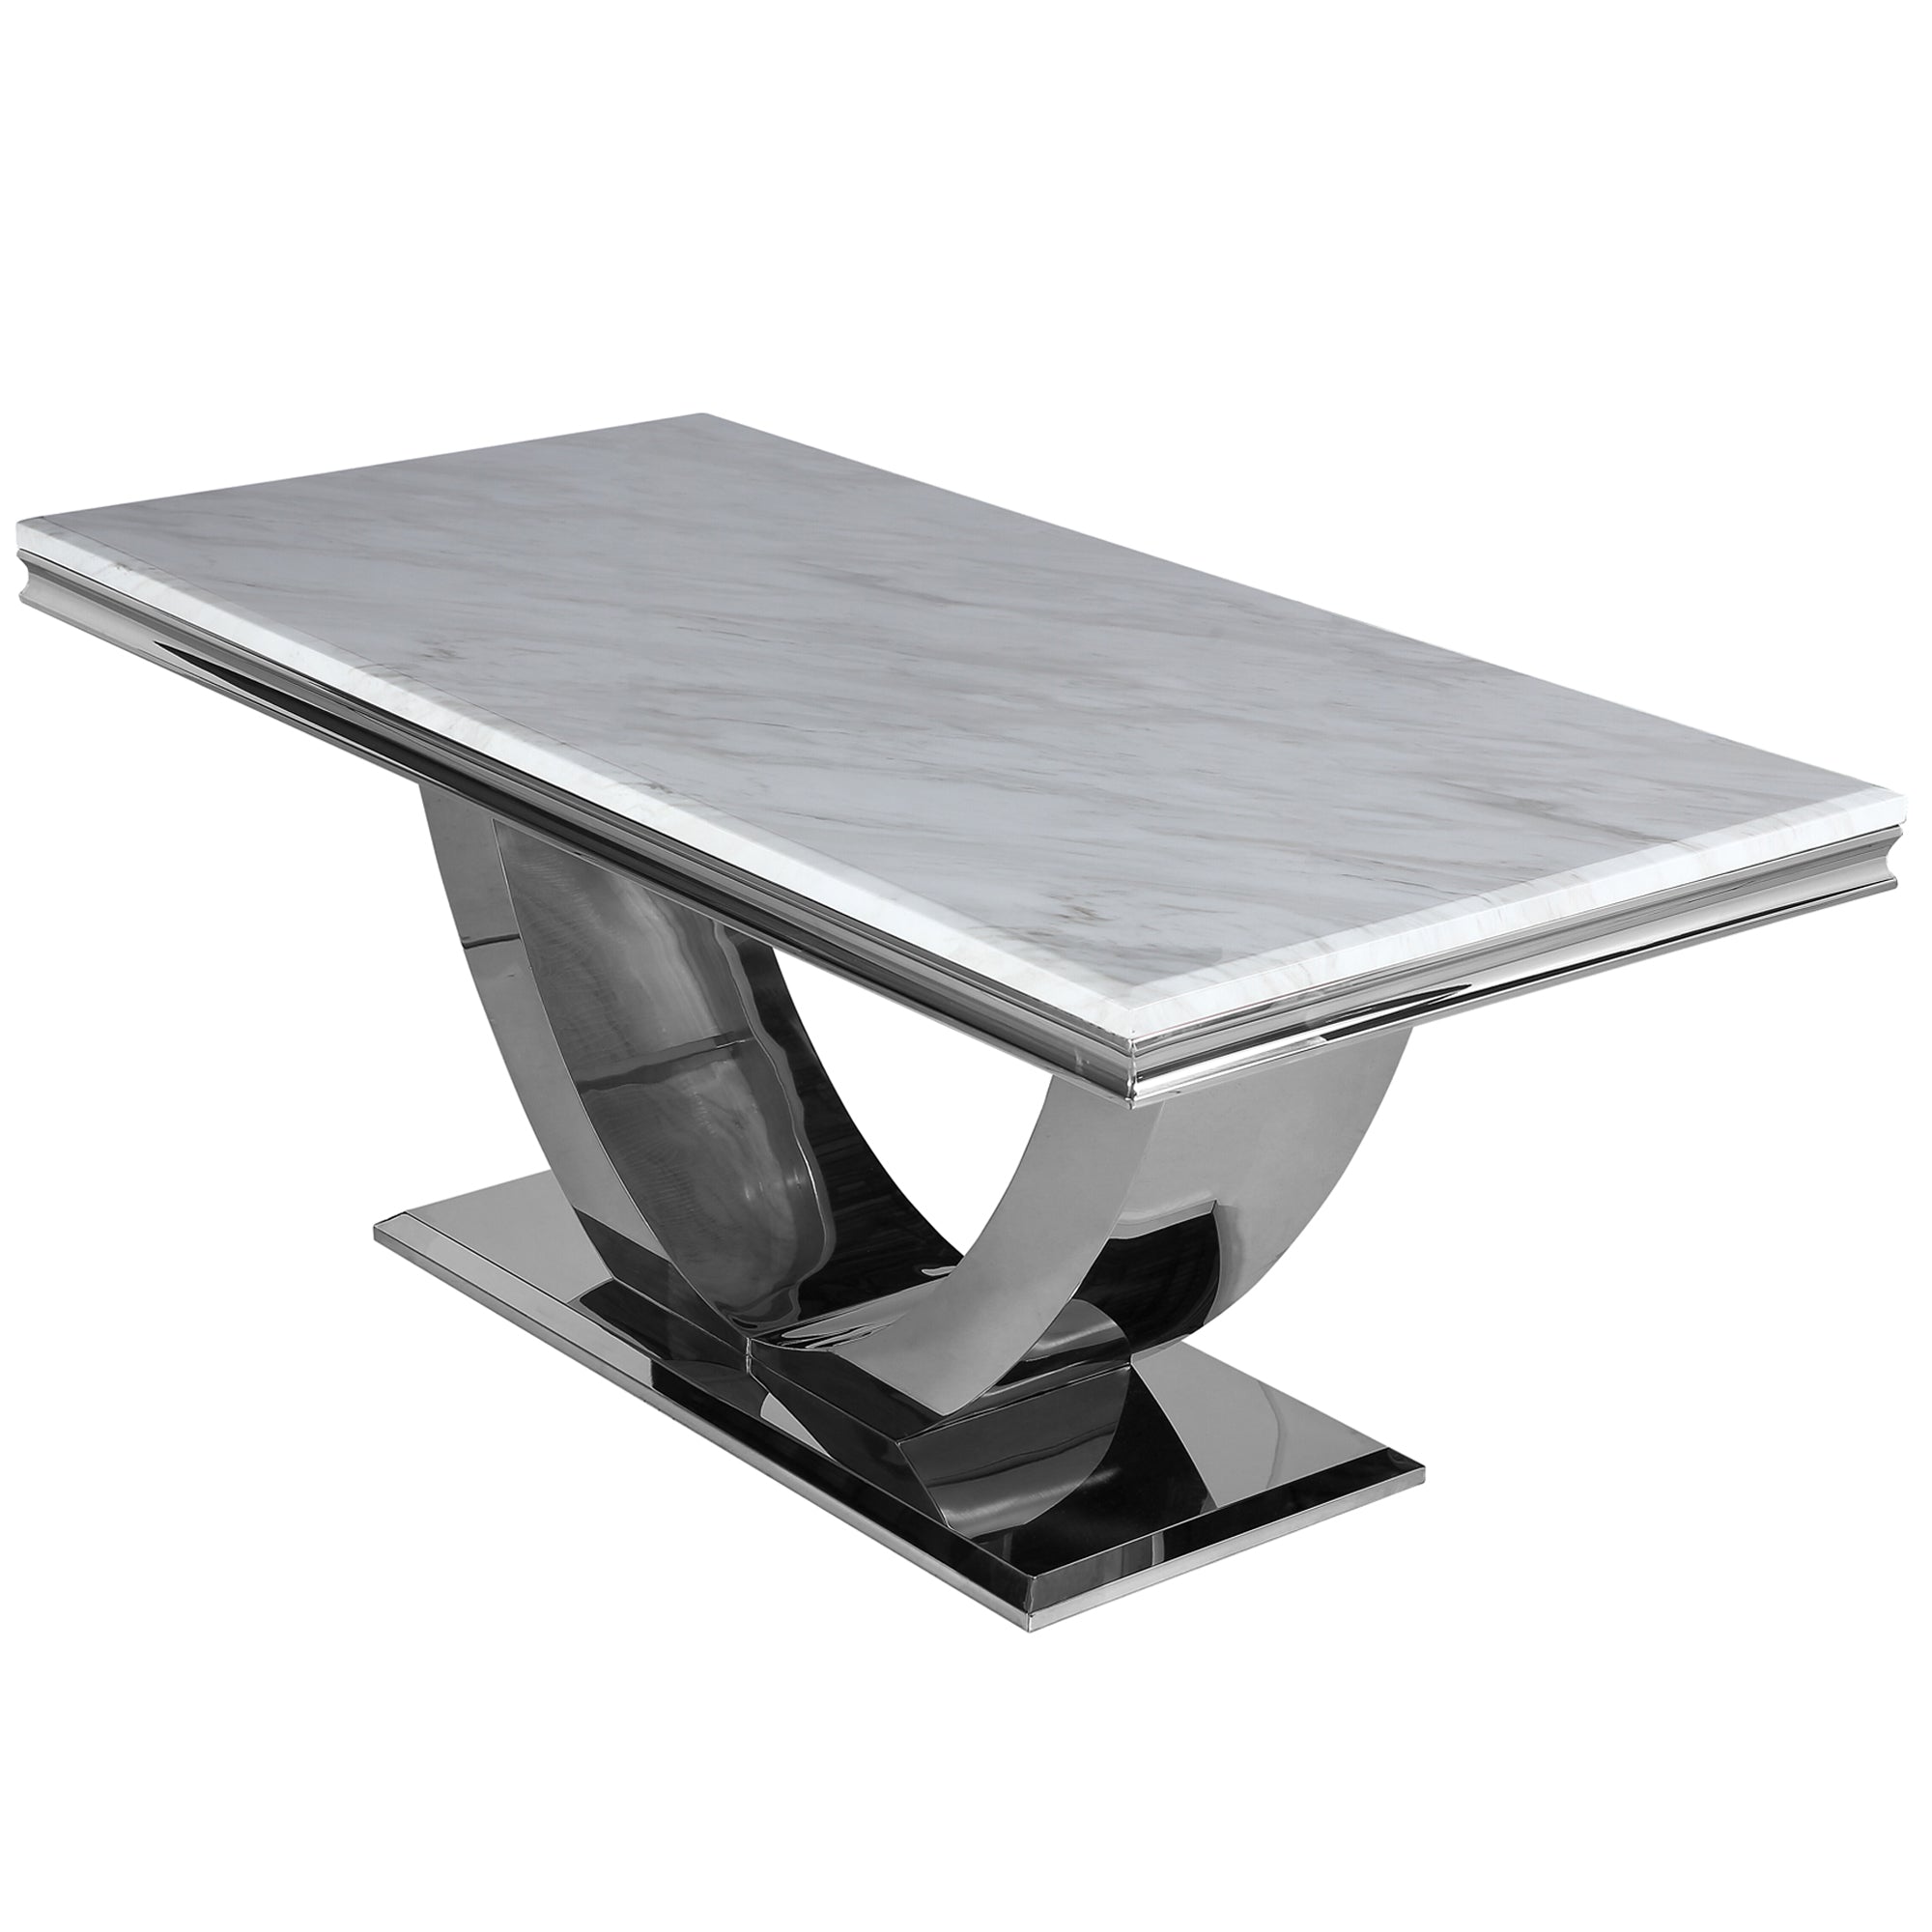 Arial Dining Table - ALL SIZES